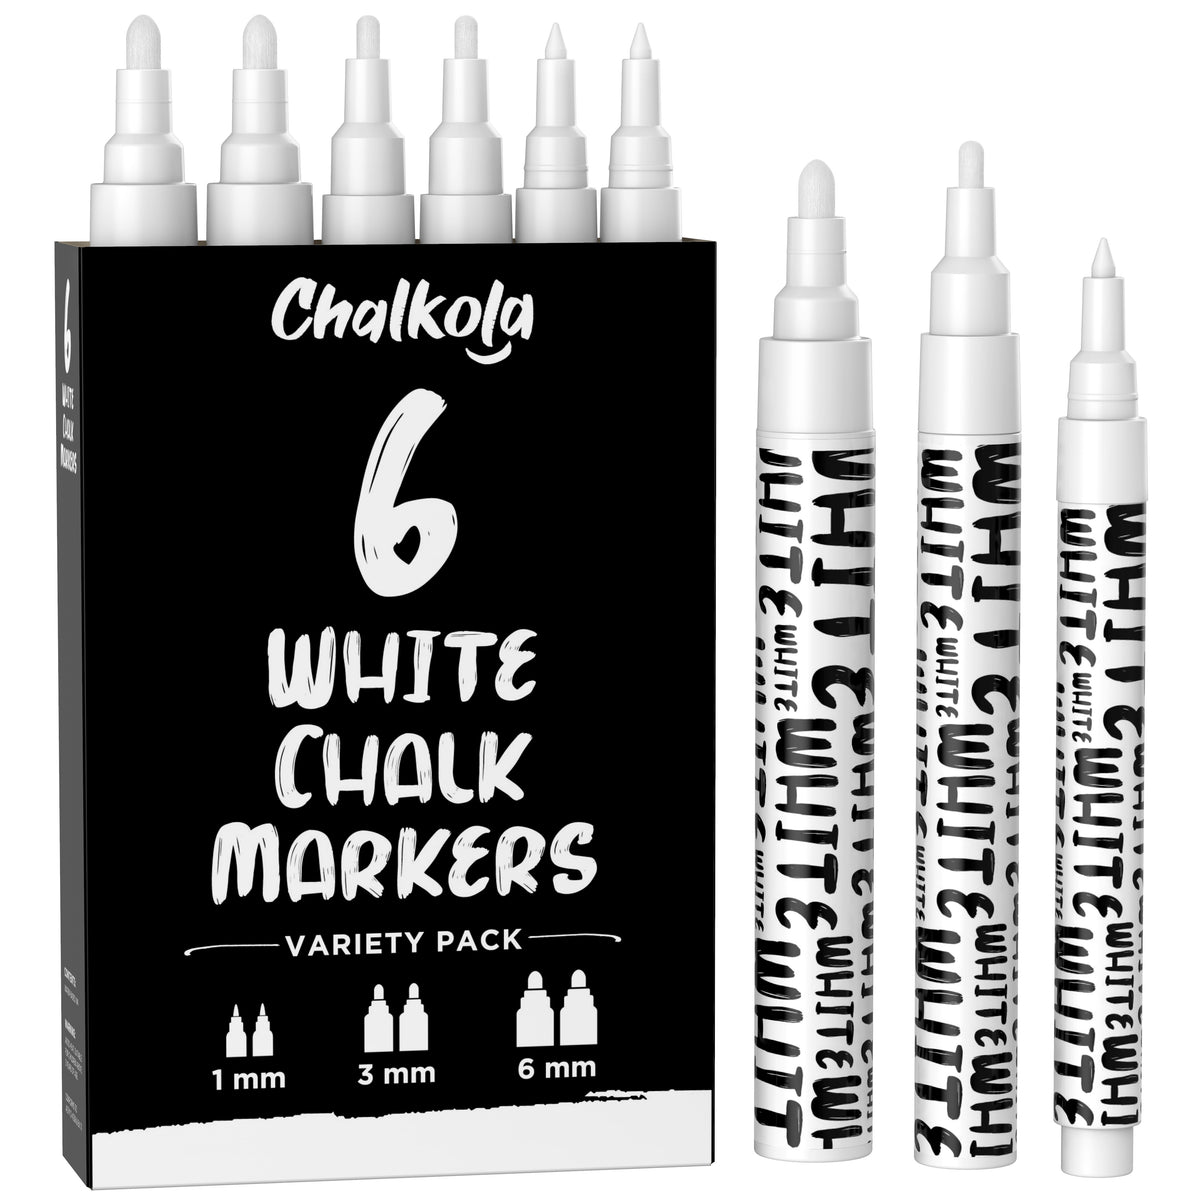 Chalk Markers Bundle - 5 White Variety + 10 Bold Colors